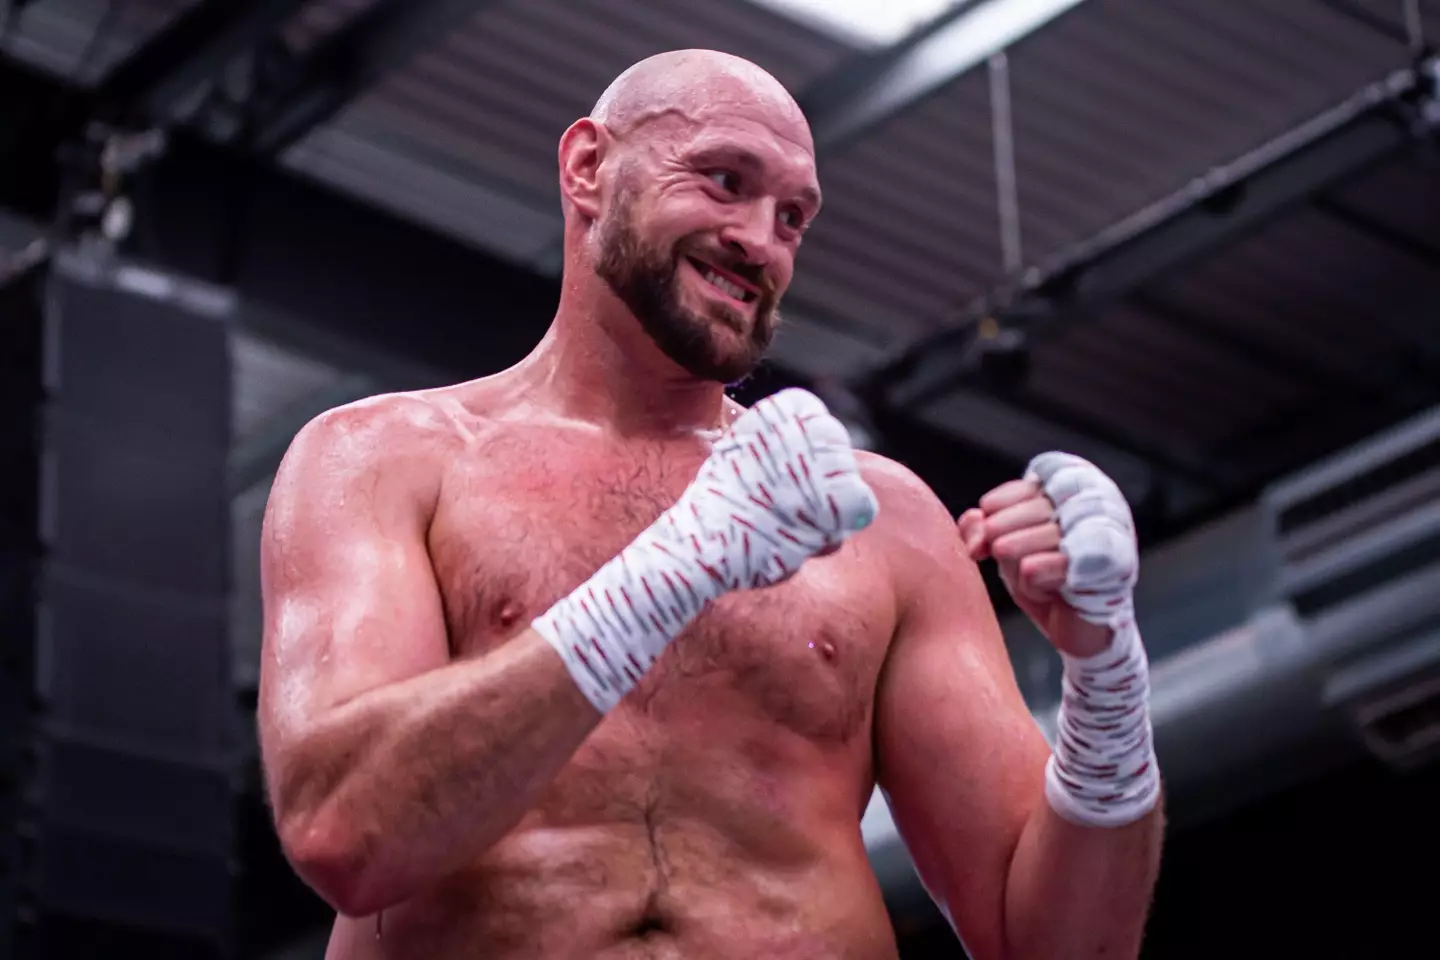 The world's smallest street is the same size as Tyson Fury.